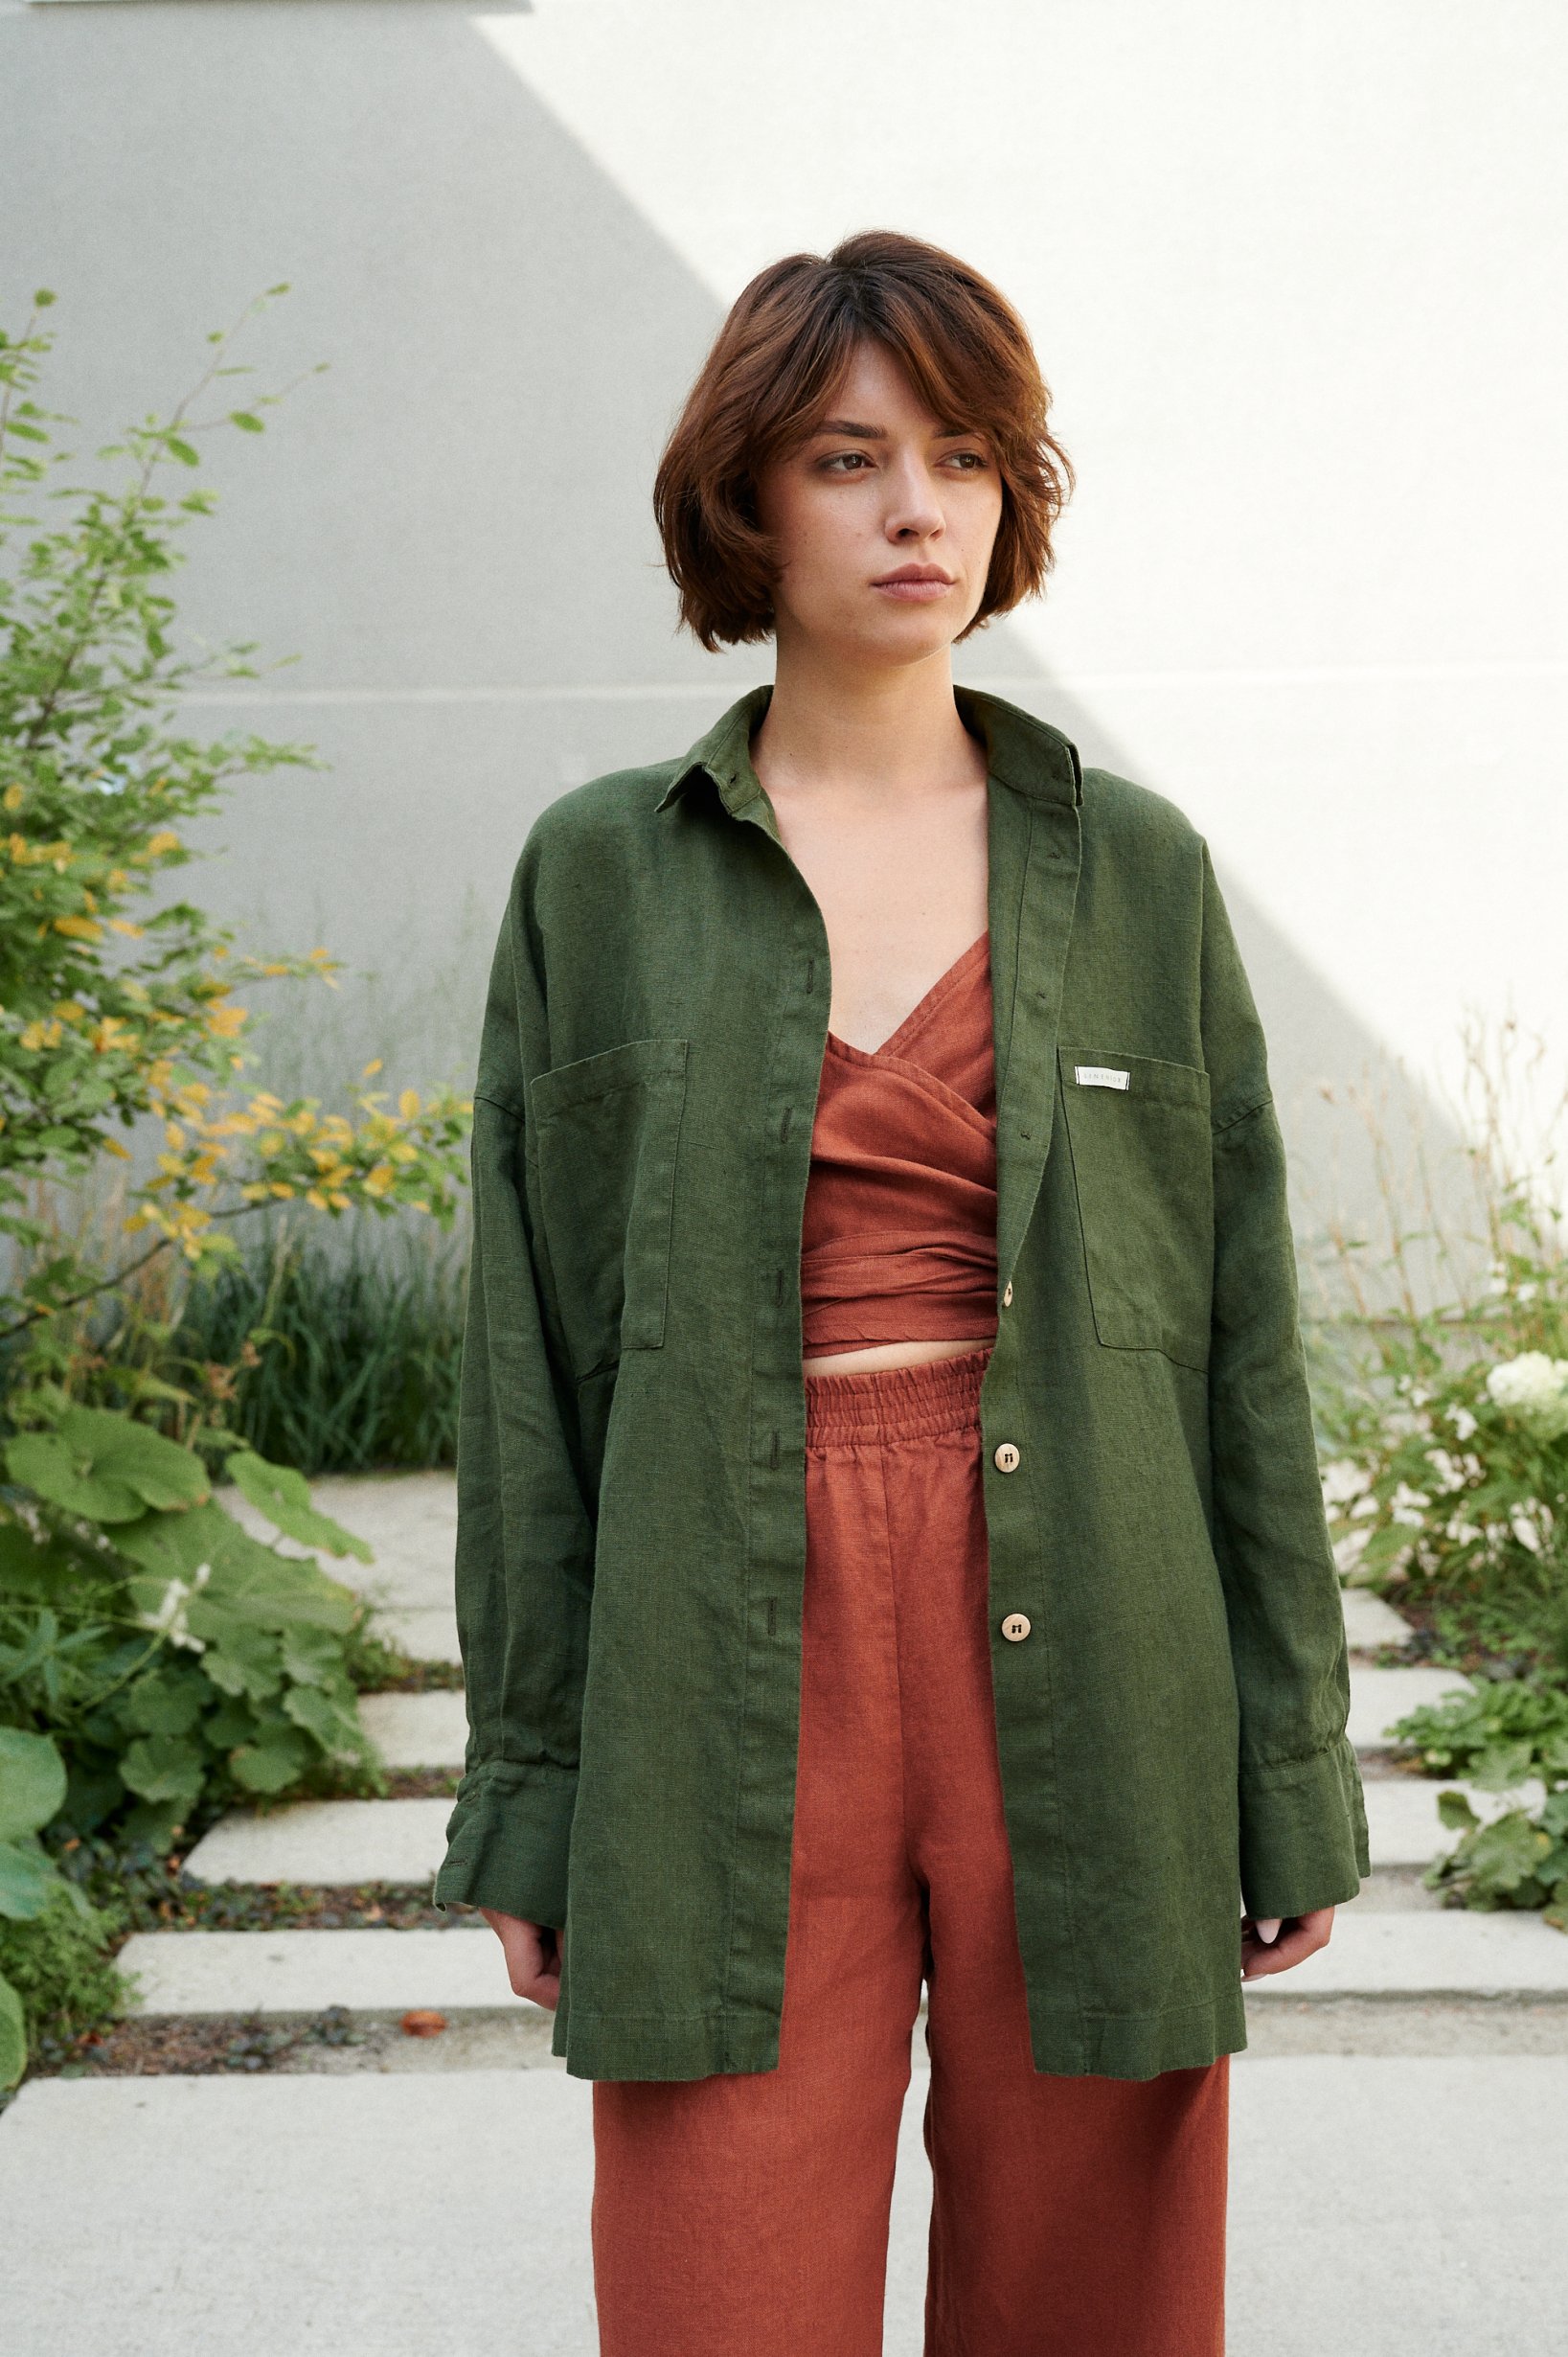 Woman in a loose-fitting green button down linen shirt and terracotta linen top and trousers outfit